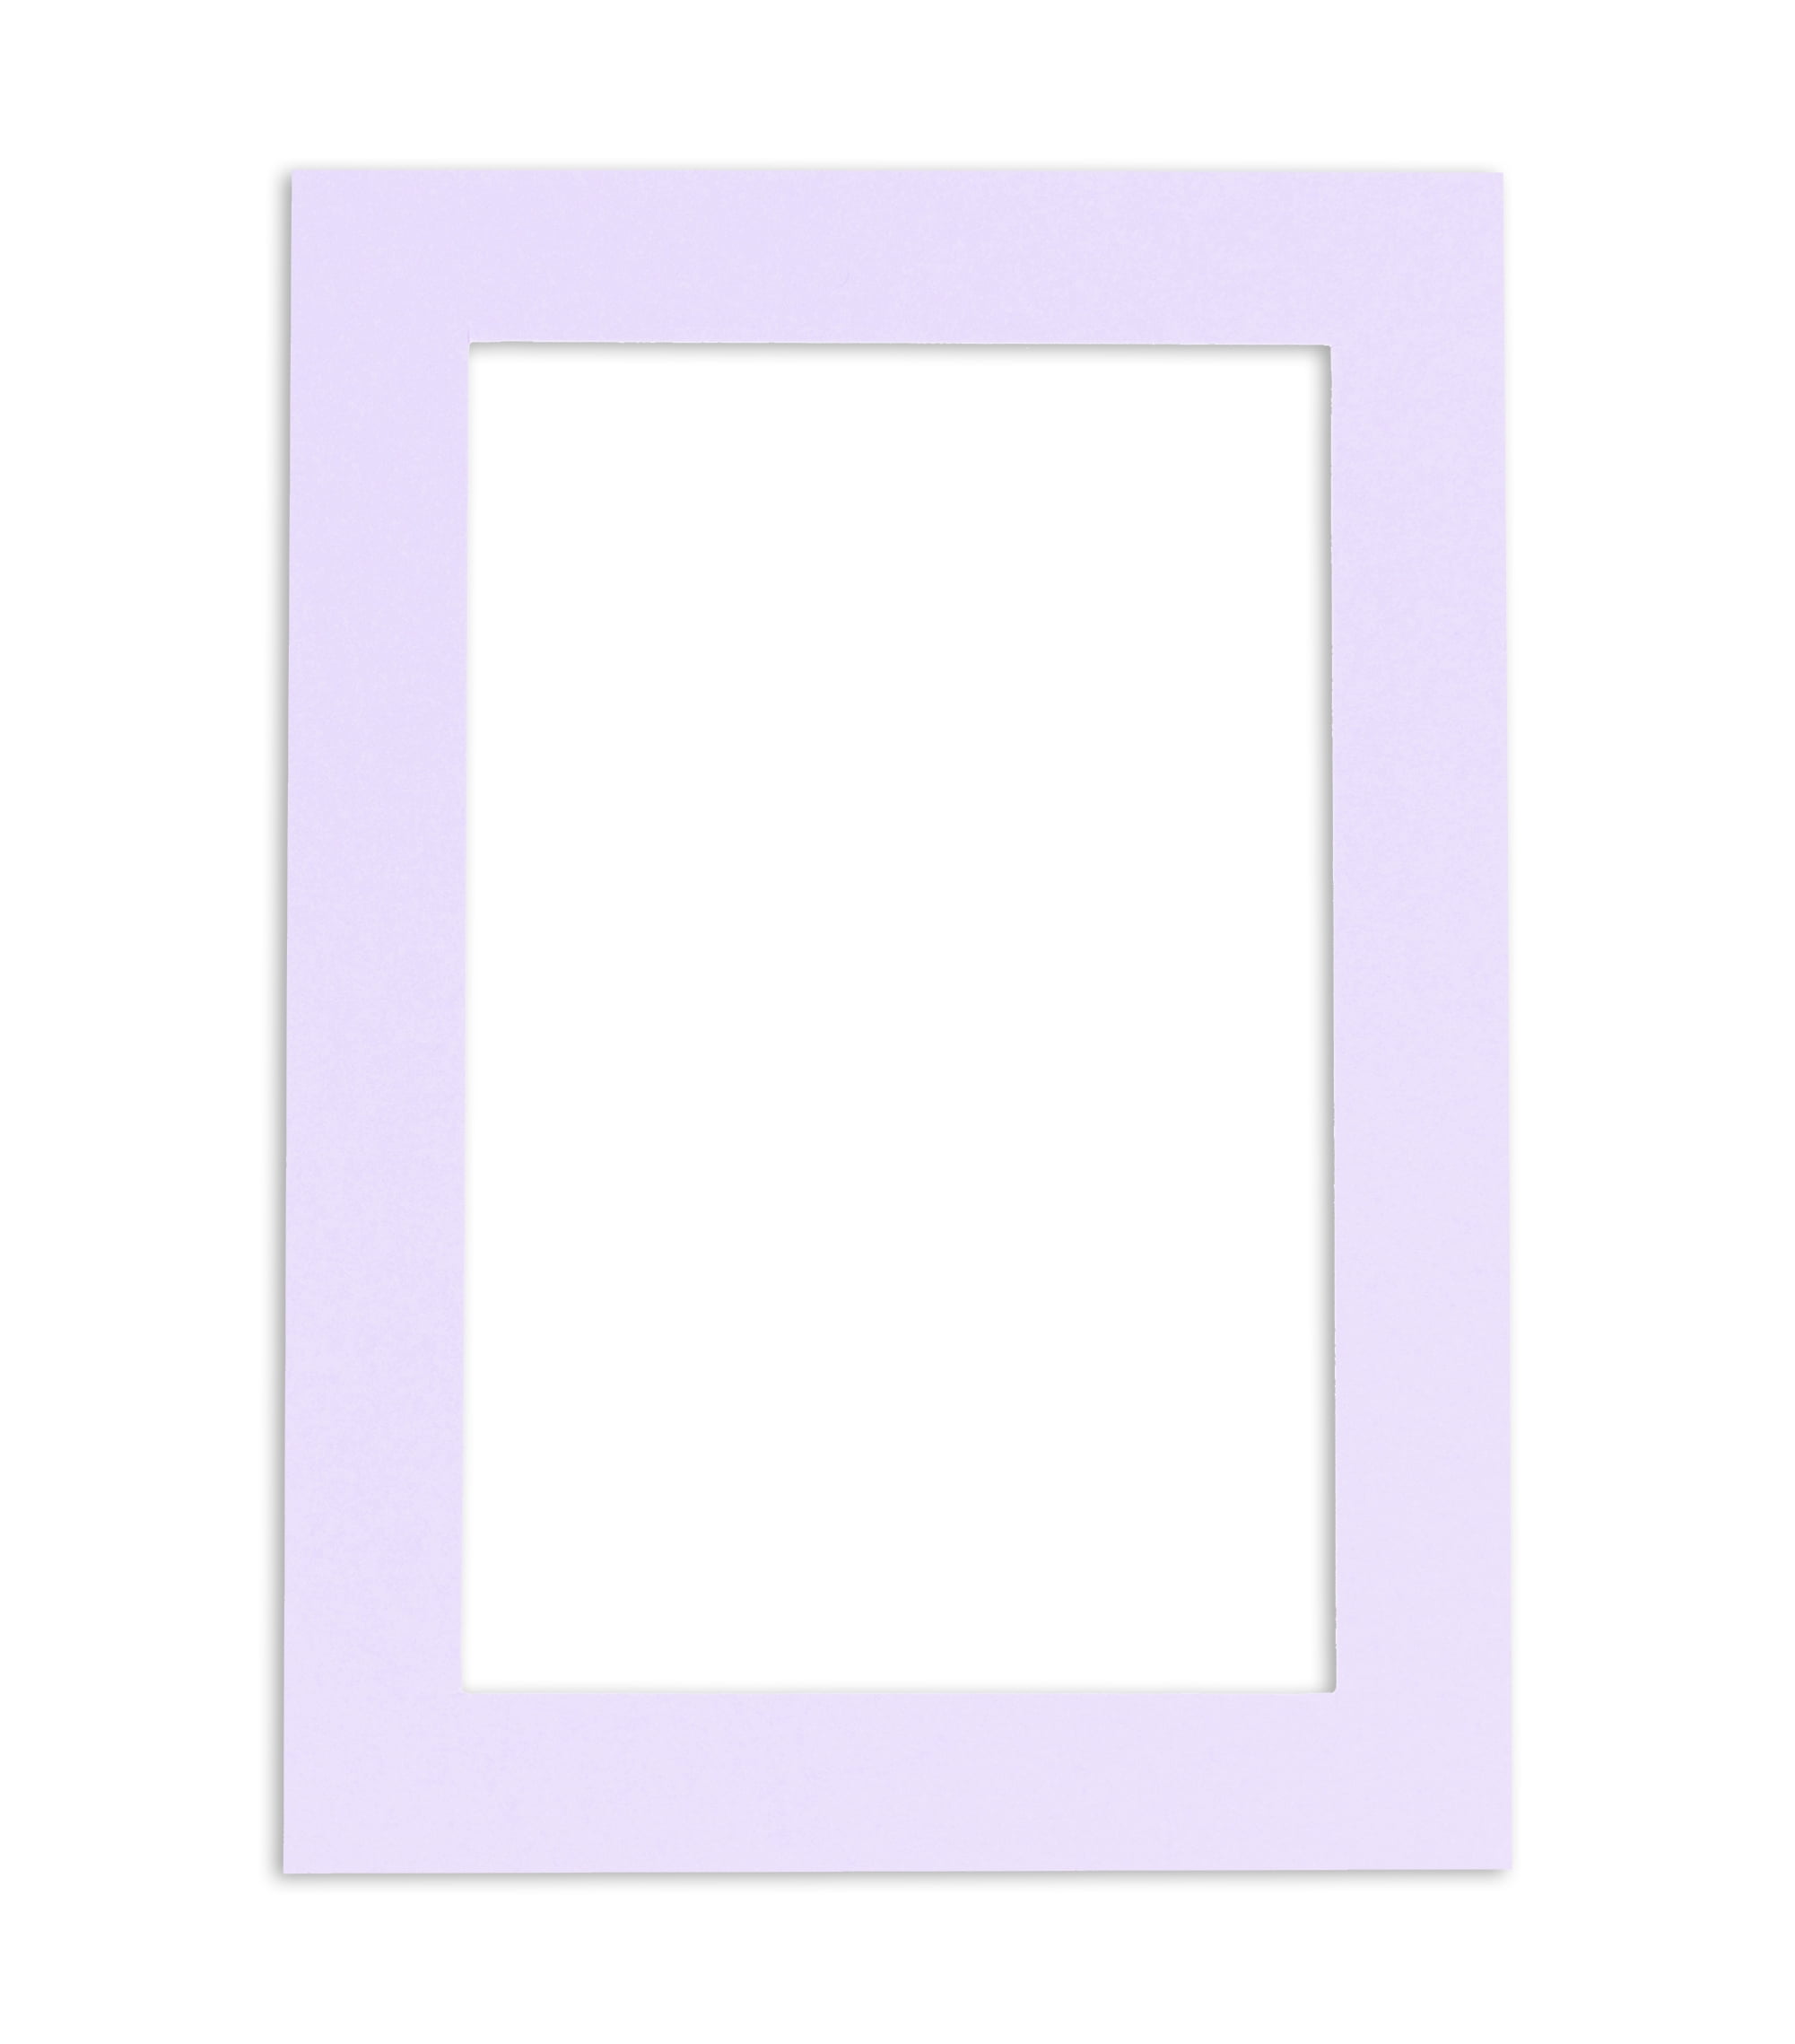 Navy Blue Acid Free 11x14 Picture Frame Mats with White Core Bevel Cut for  8x10 Pictures - Fits 